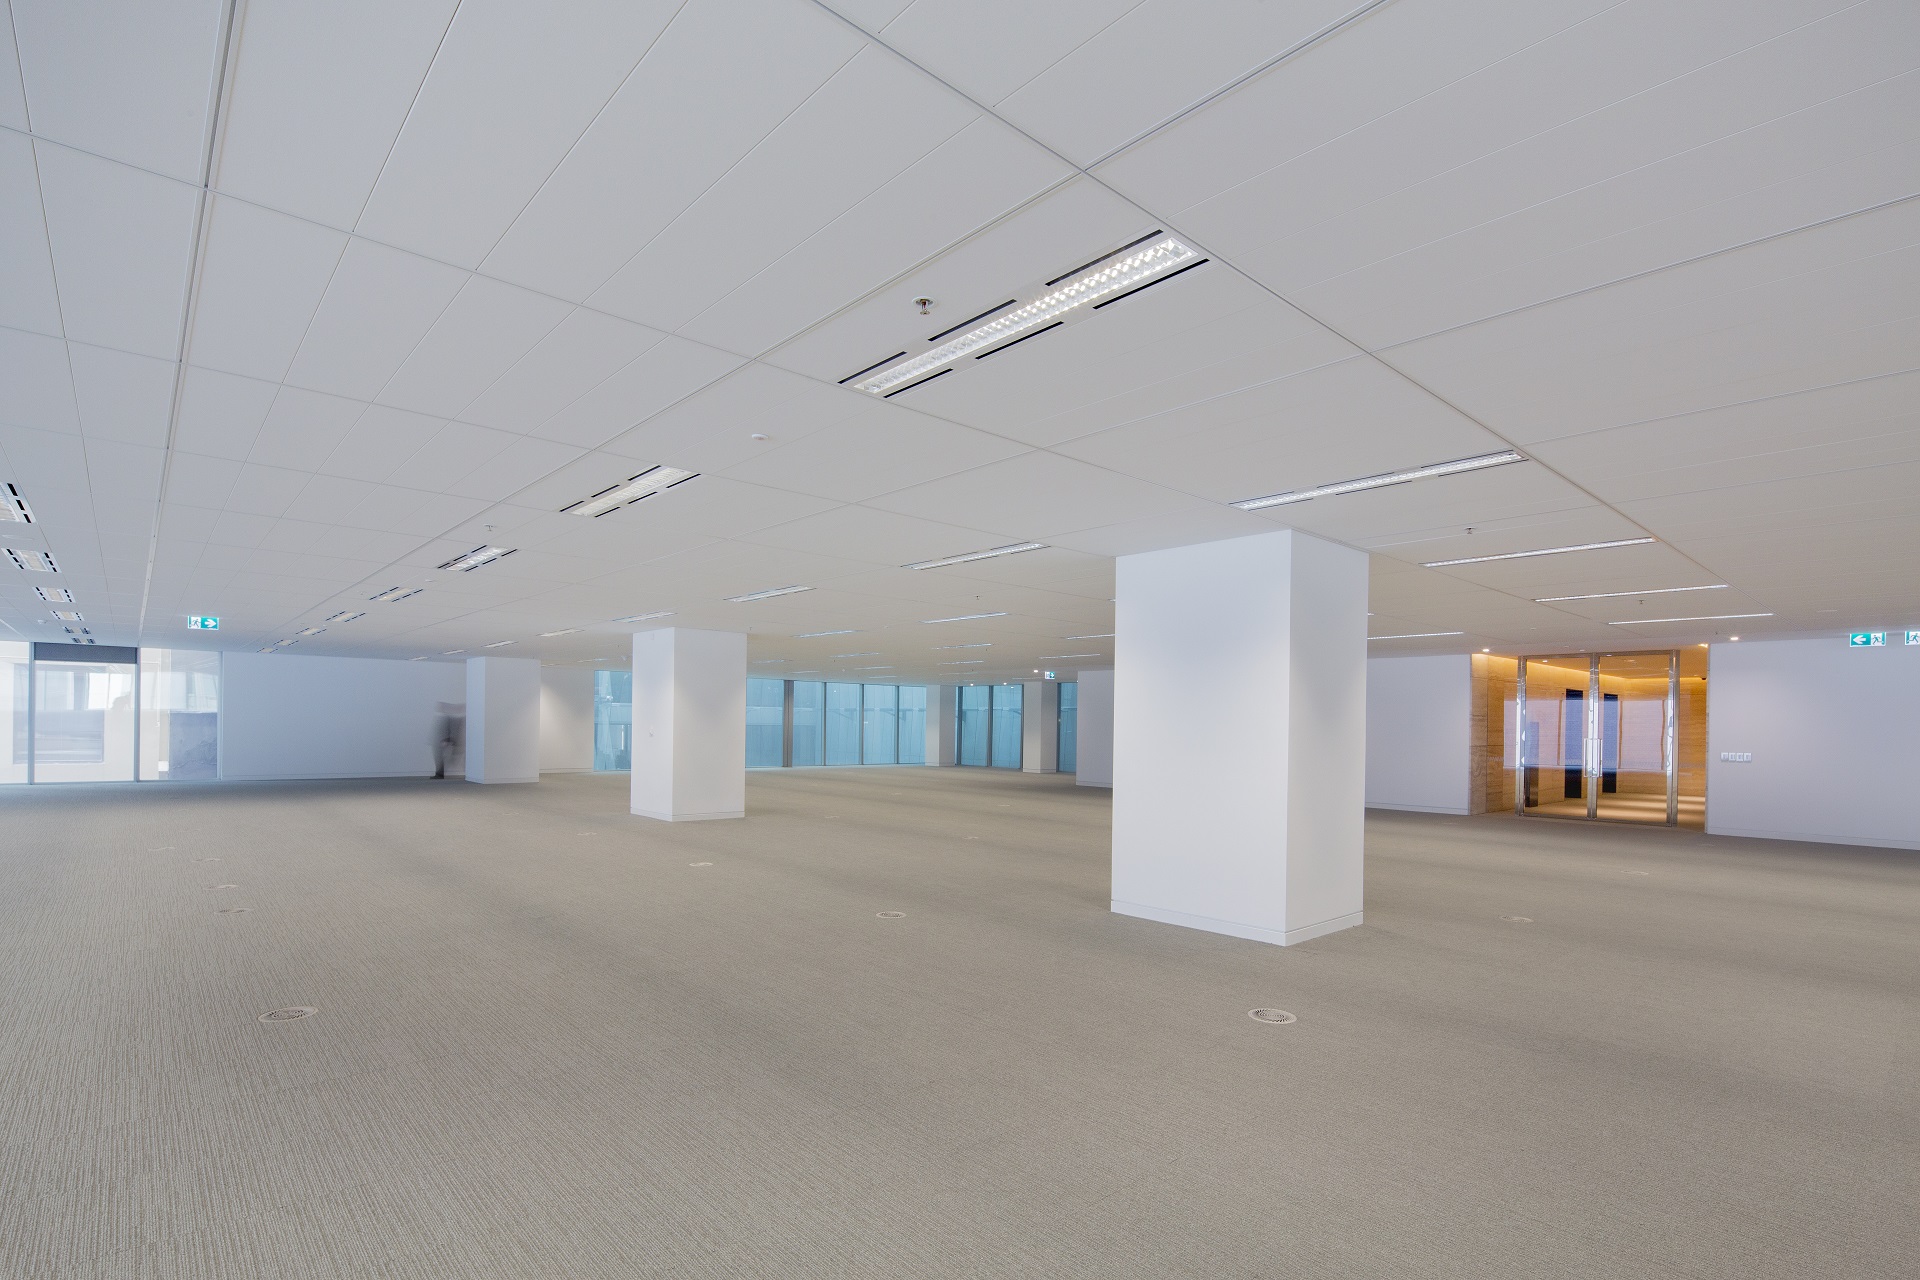 Modular metal ceilings offer durability, excellent acoustics and easy installation